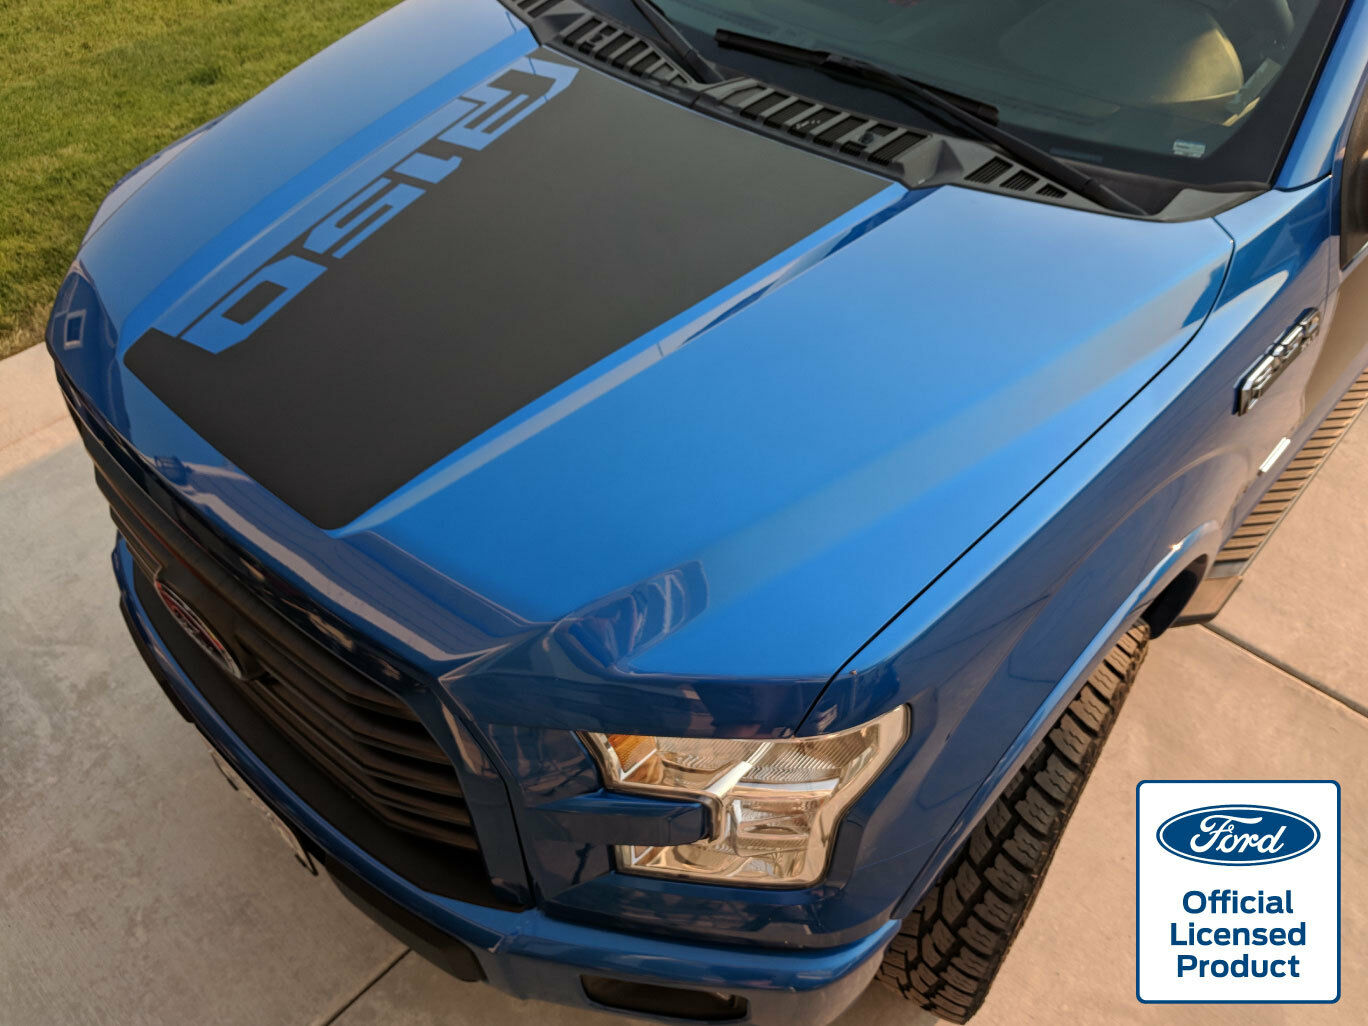 2015 2020 Ford F 150 Solid Hood Reaper Style Decals Stripes 3m Vinyl